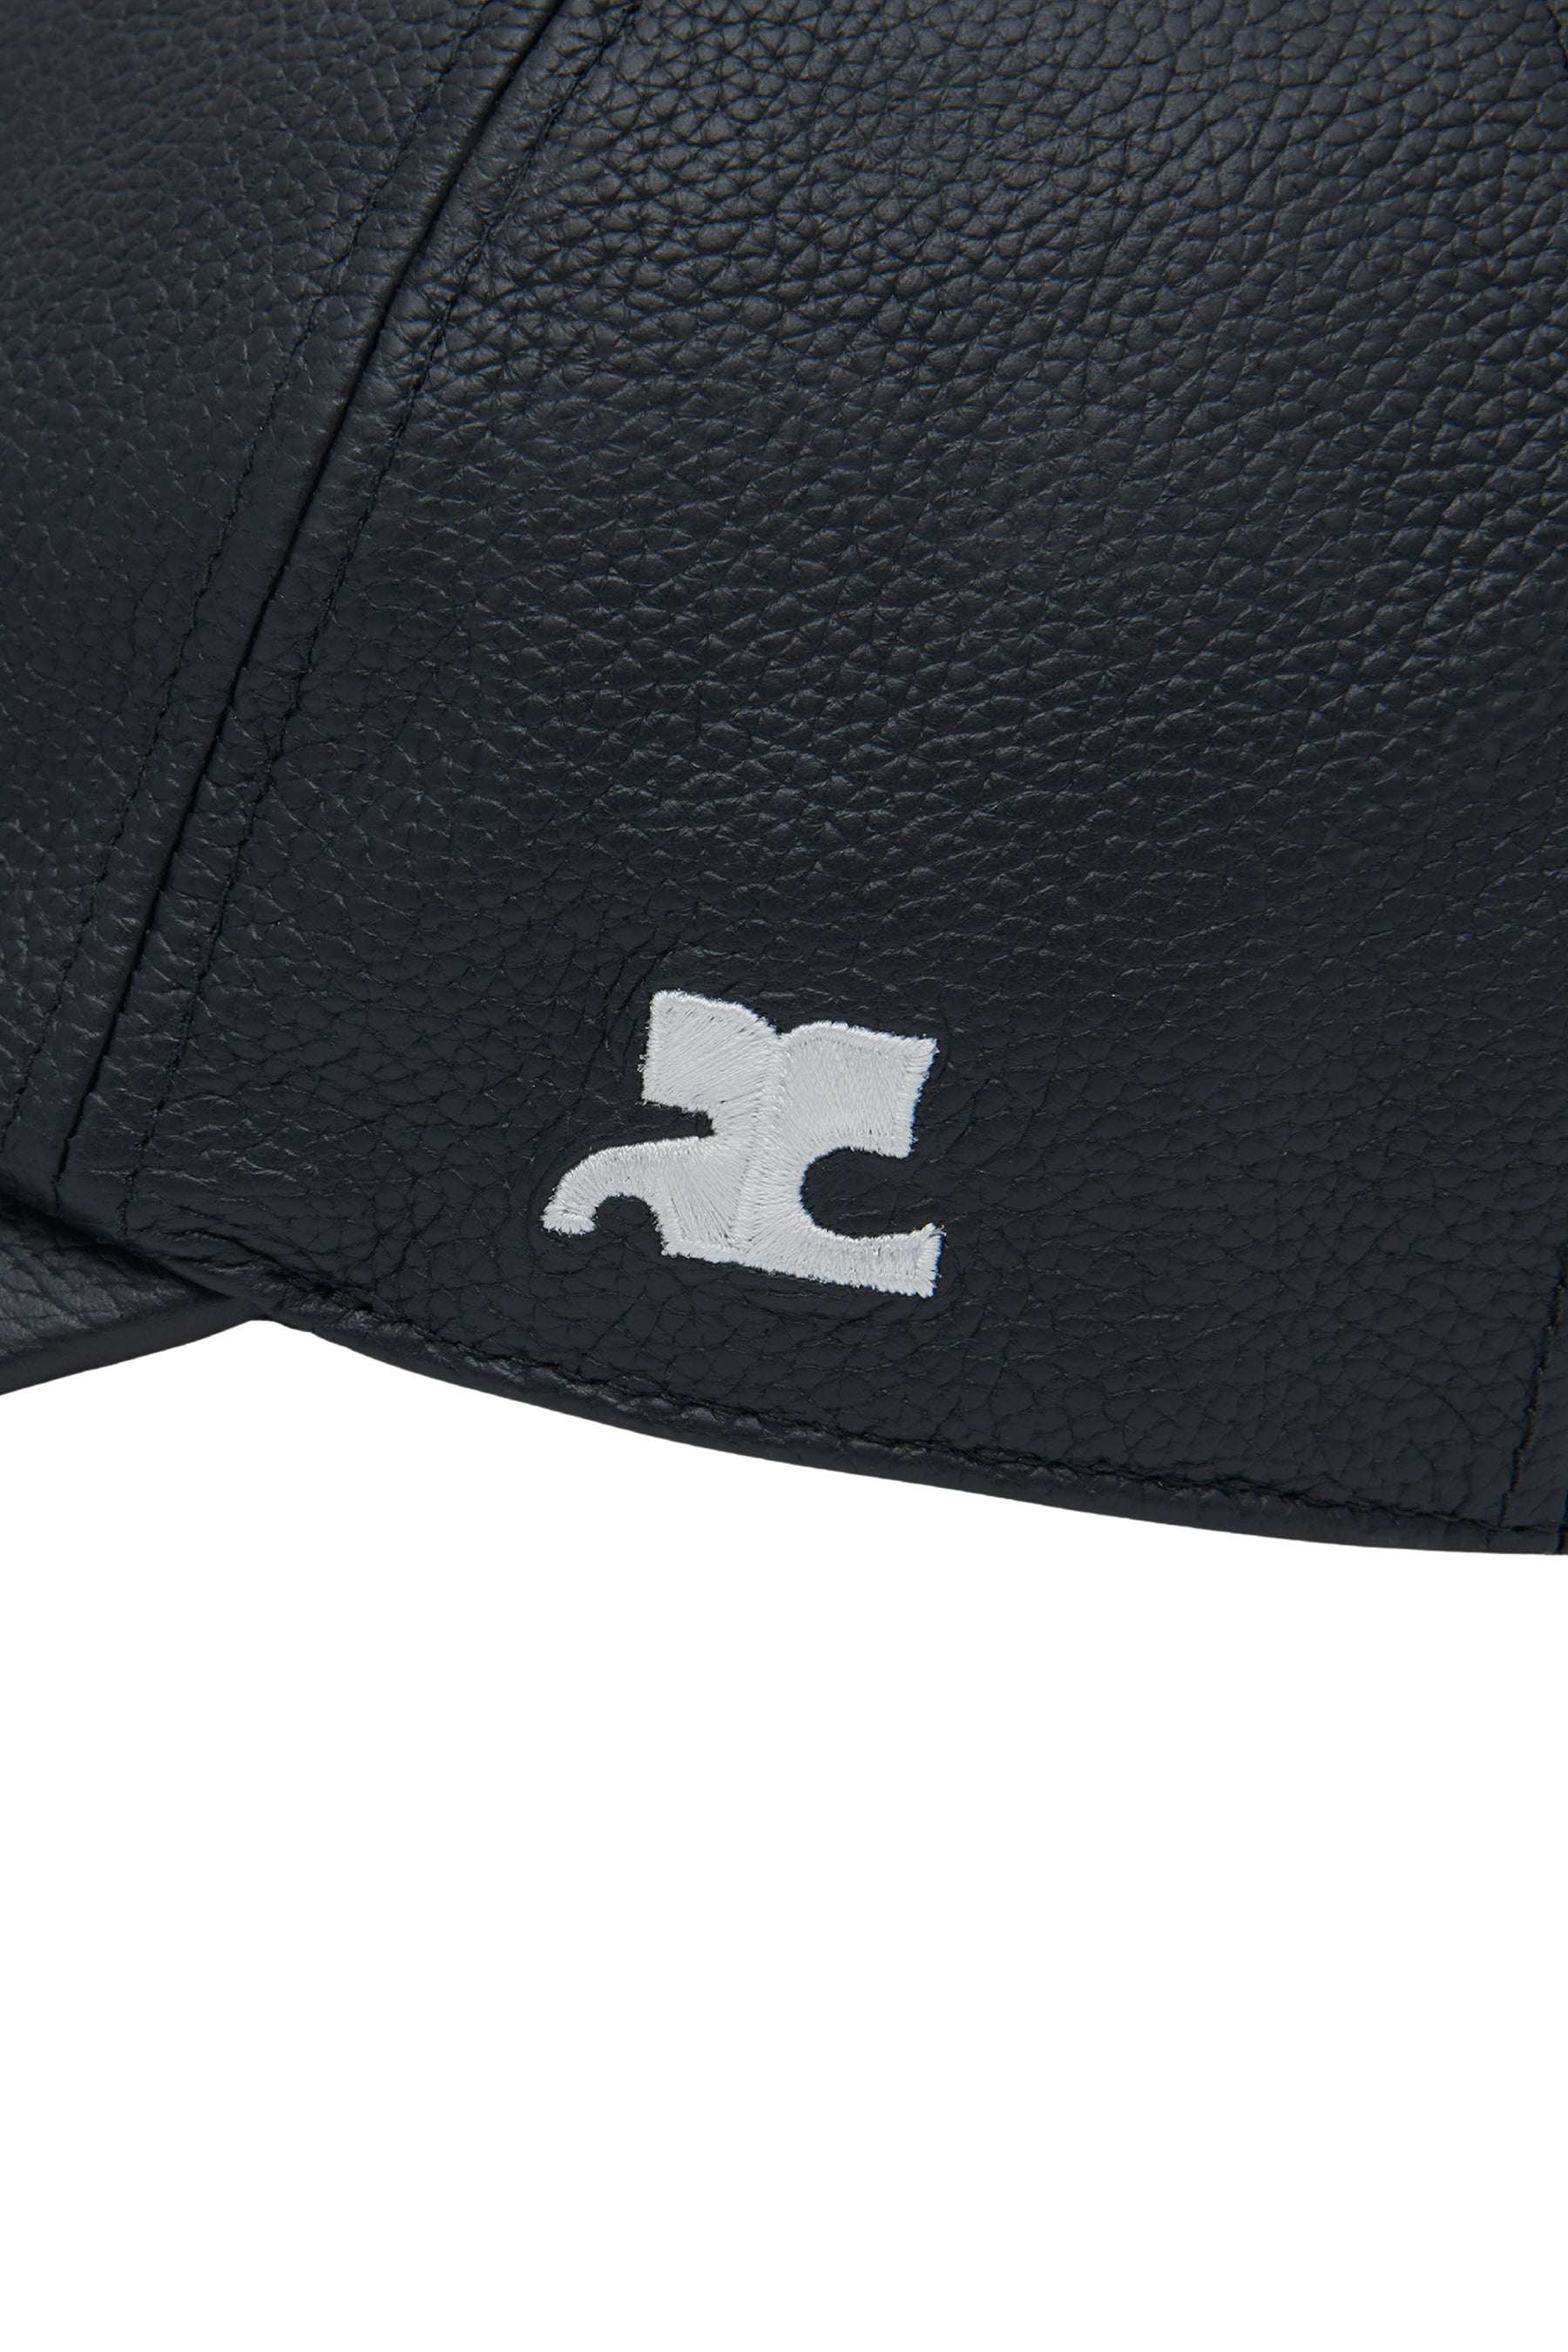 GOGO GRAINED LEATHER CAP / BLK